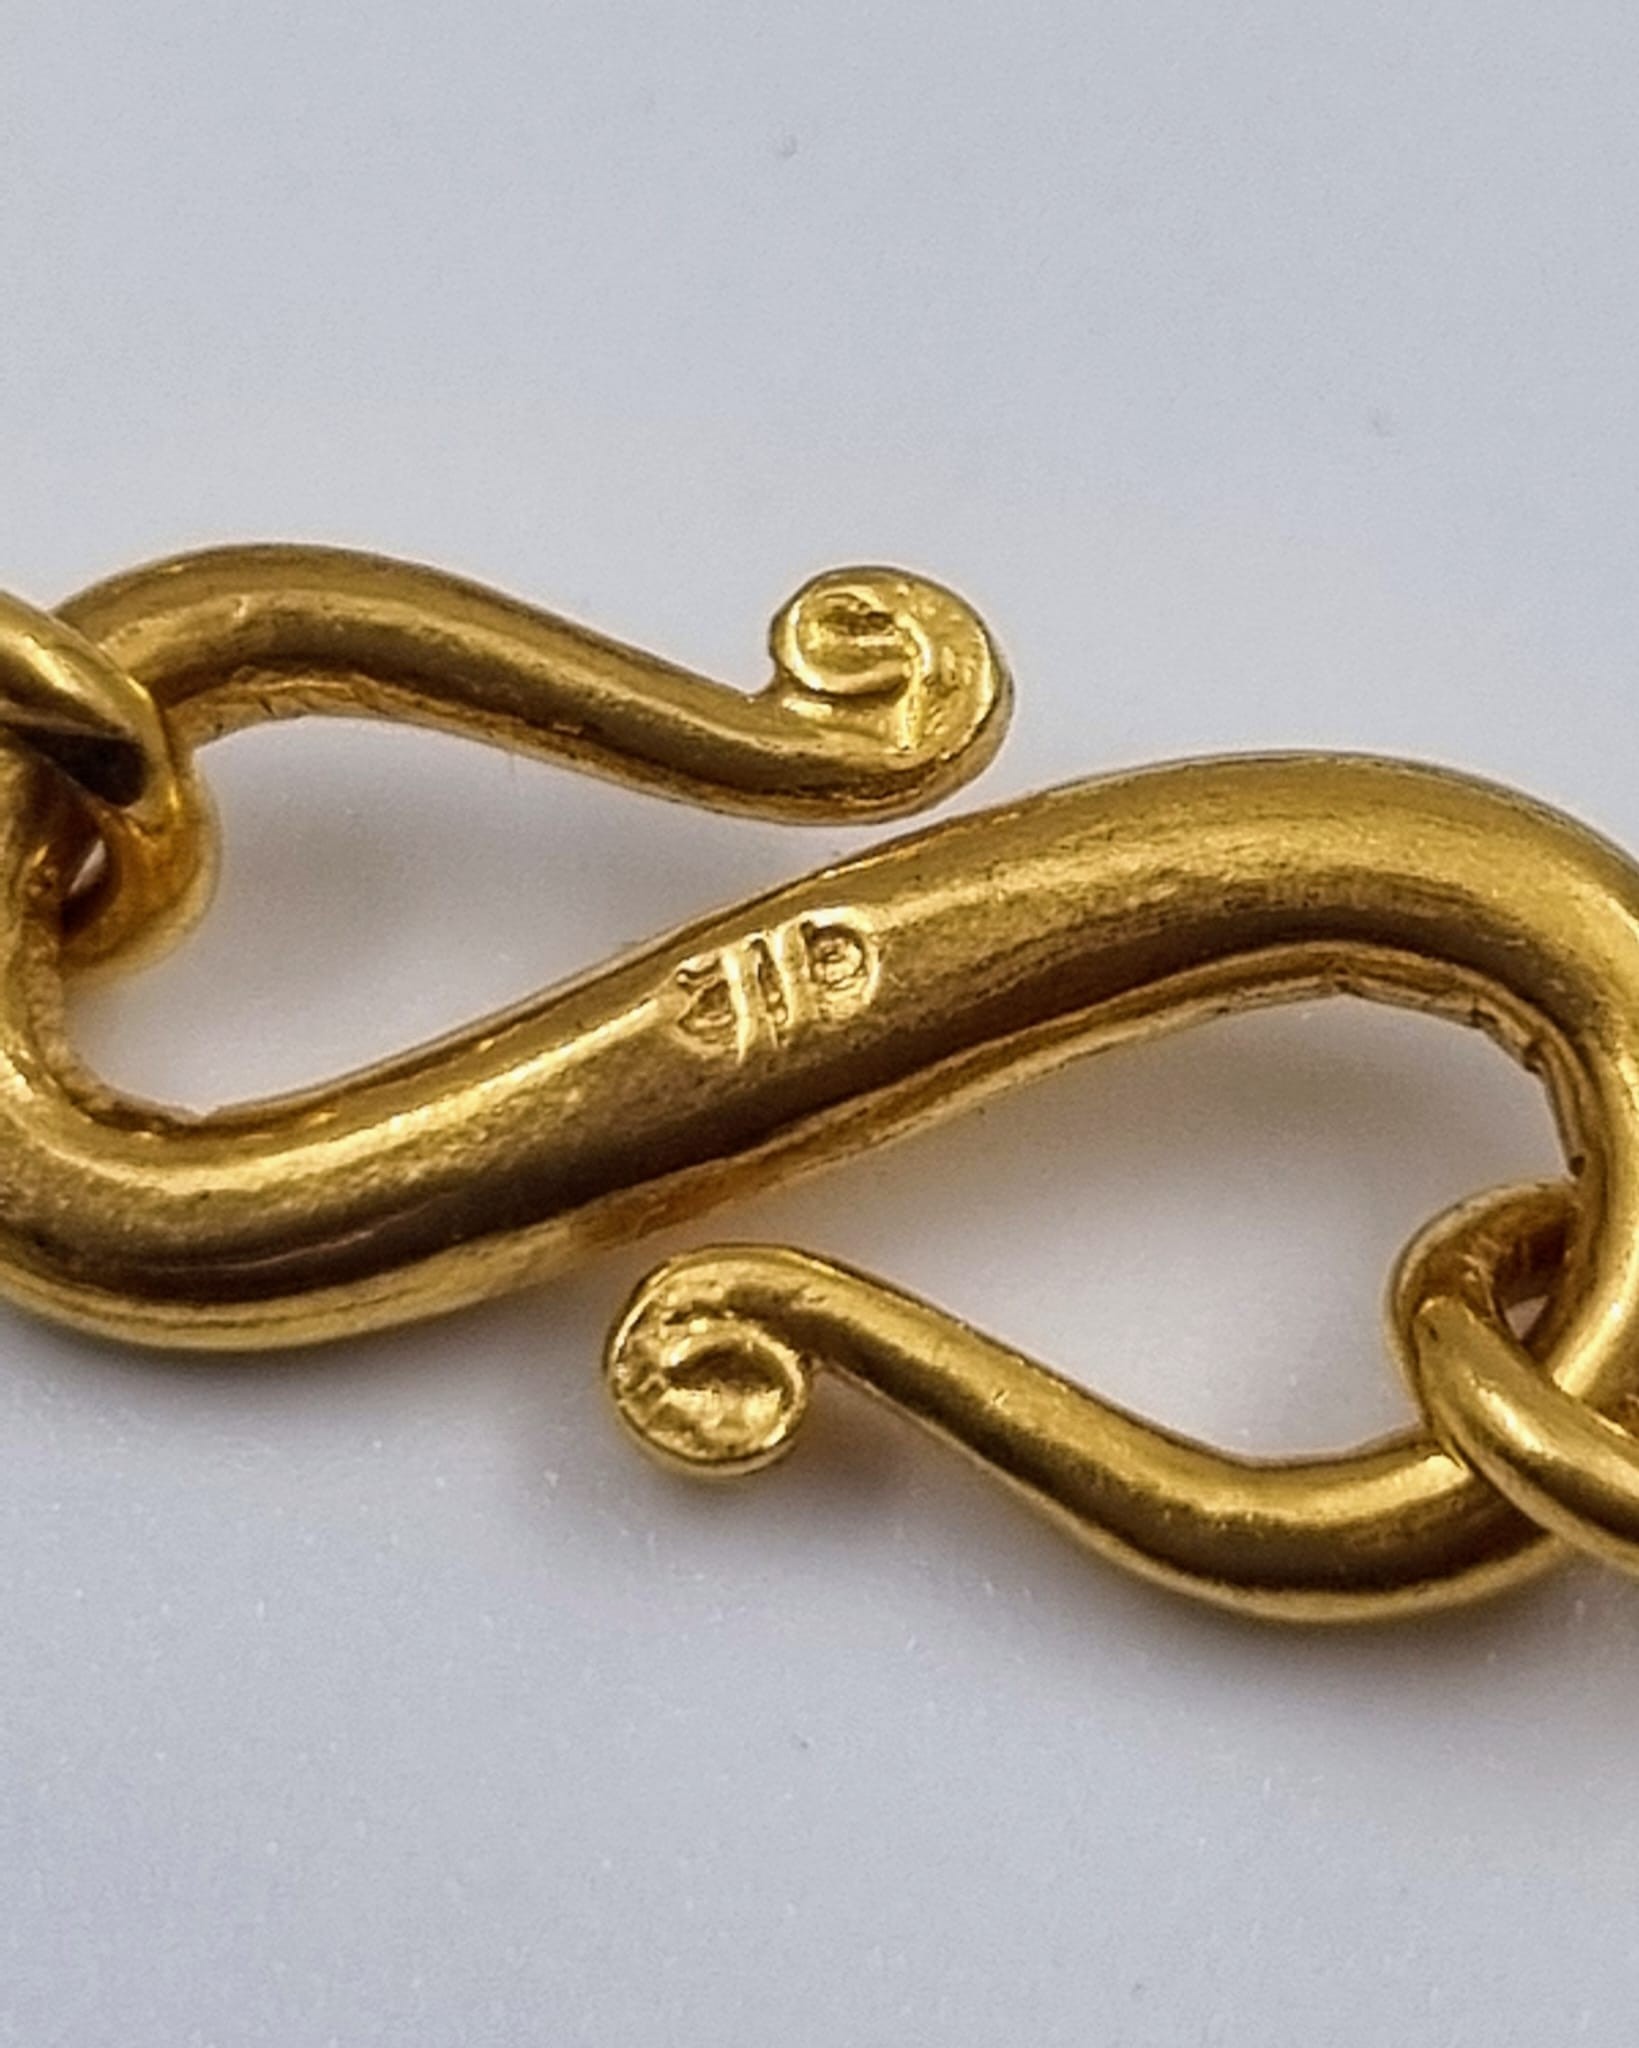 A 22k Yellow Gold Teardrop-Link Chain with S Clasp. 70cm. 53.9g - Image 2 of 4